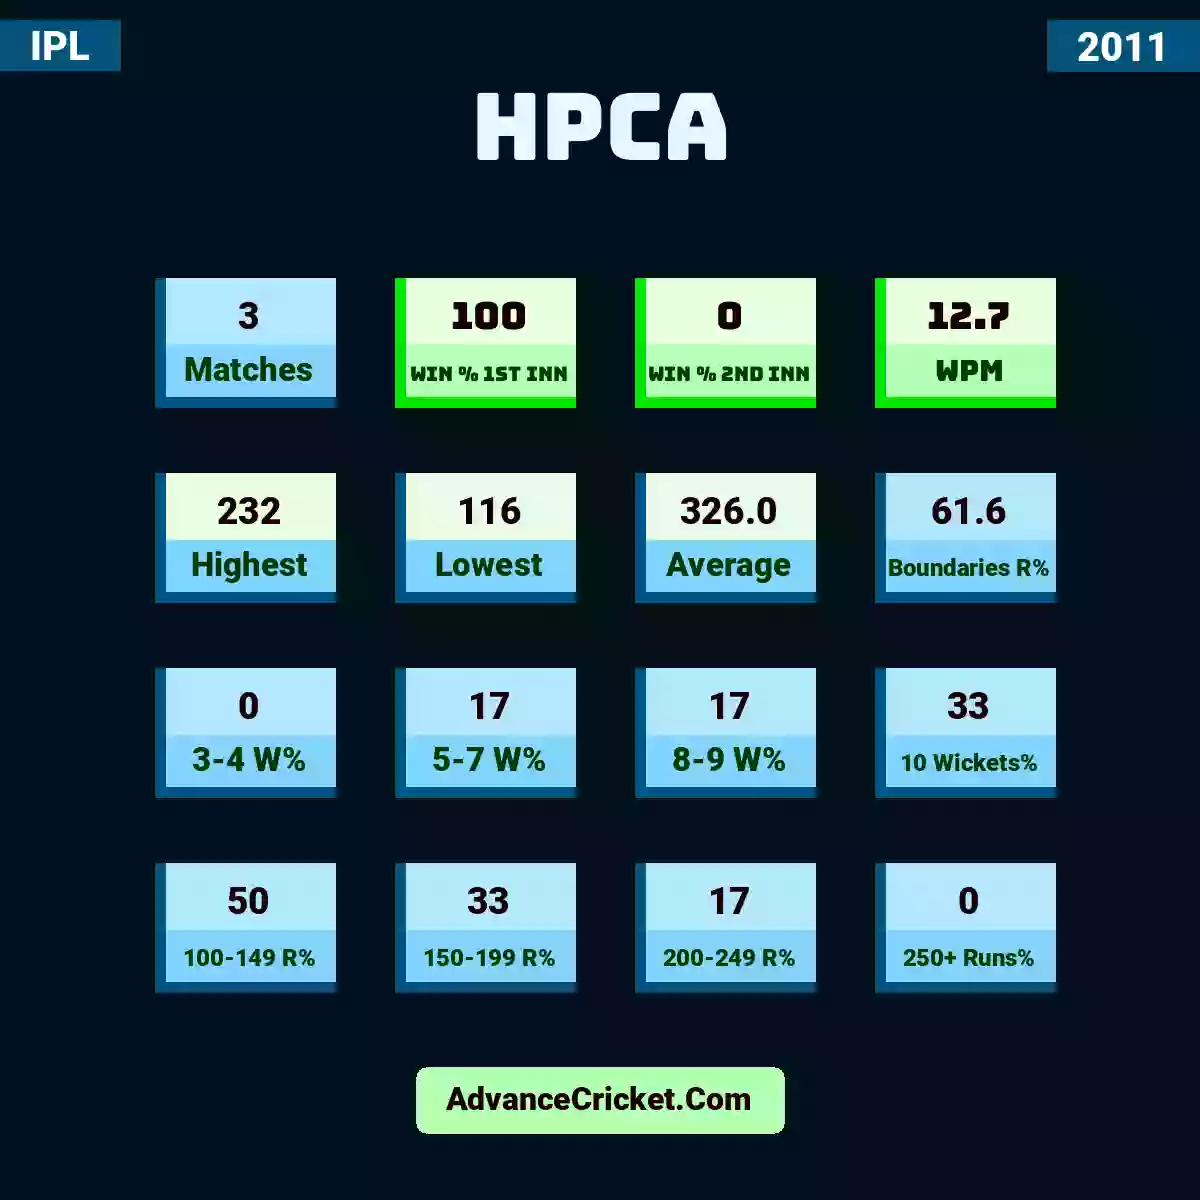 Image showing HPCA with Matches: 3, Win % 1st Inn: 100, Win % 2nd Inn: 0, WPM: 12.7, Highest: 232, Lowest: 116, Average: 326.0, Boundaries R%: 61.6, 3-4 W%: 0, 5-7 W%: 17, 8-9 W%: 17, 10 Wickets%: 33, 100-149 R%: 50, 150-199 R%: 33, 200-249 R%: 17, 250+ Runs%: 0.